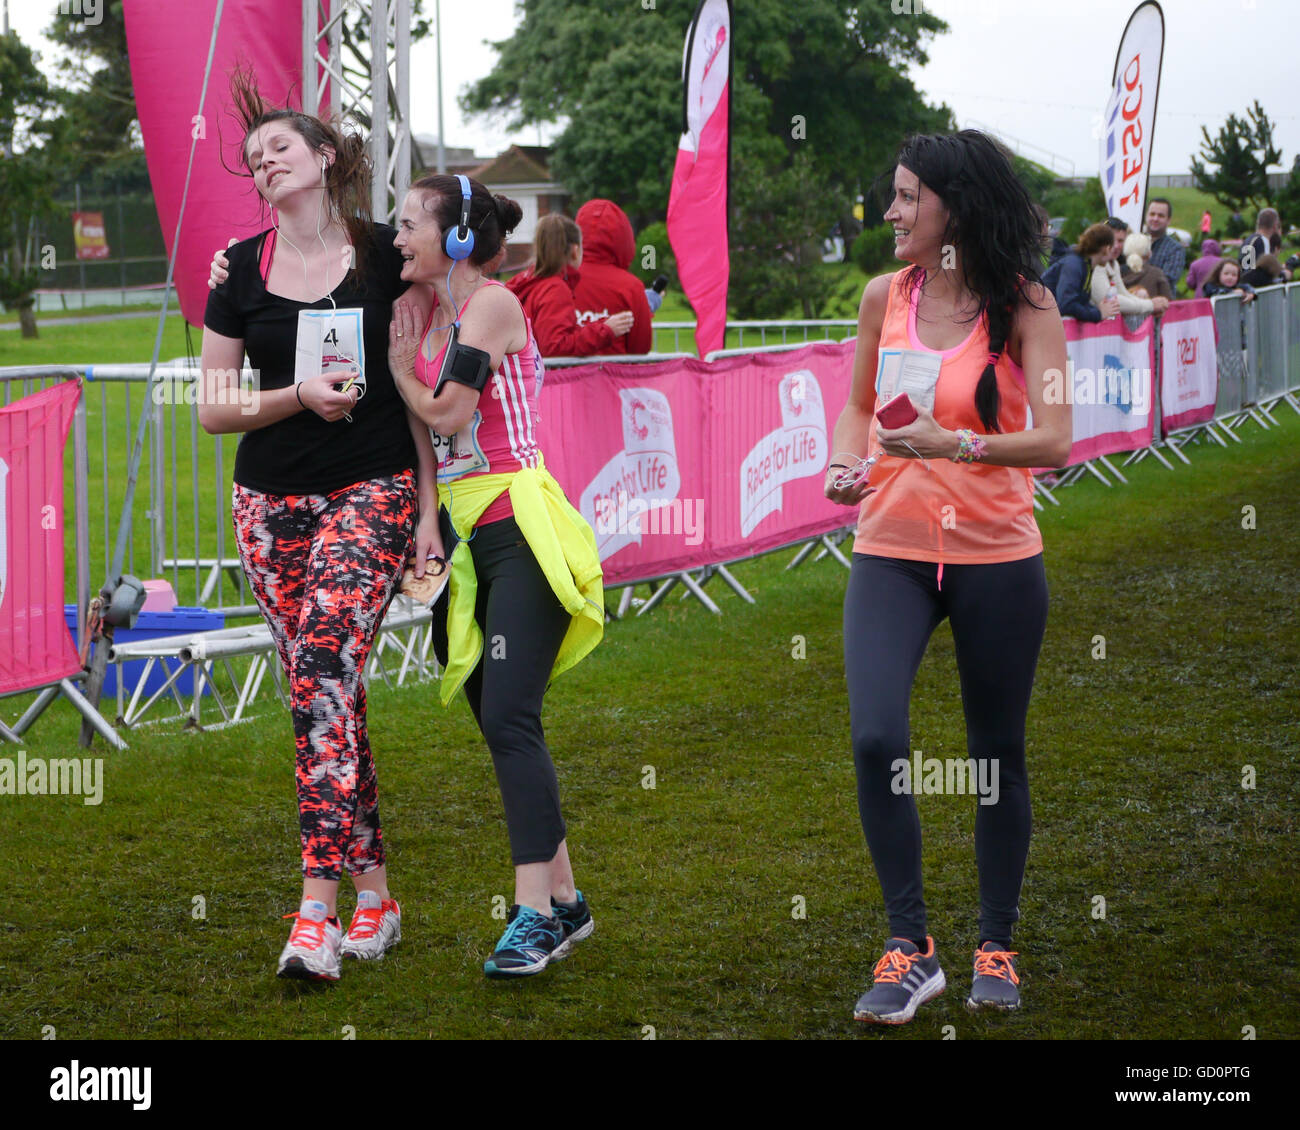 Portsmouth, Hampshire, UK. 10 July 2016. Friends cross the finish line at the end of the Race for life. The Race for life is a charity event in which females complete a 10Km or 5Km run in aid of cancer research. Credit:  simon evans/Alamy Live News Stock Photo